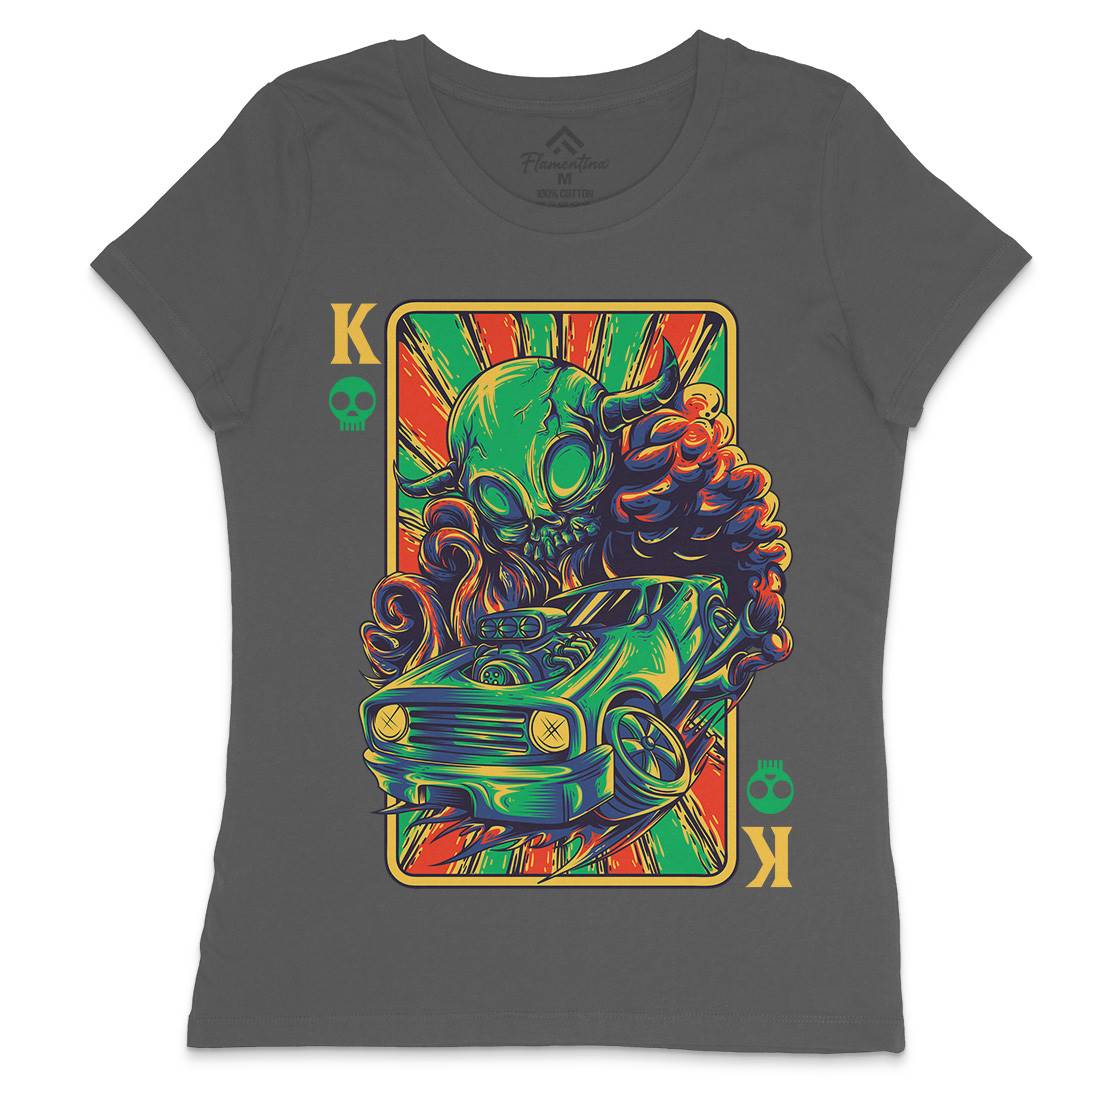 King Of Kings Womens Crew Neck T-Shirt Cars D632